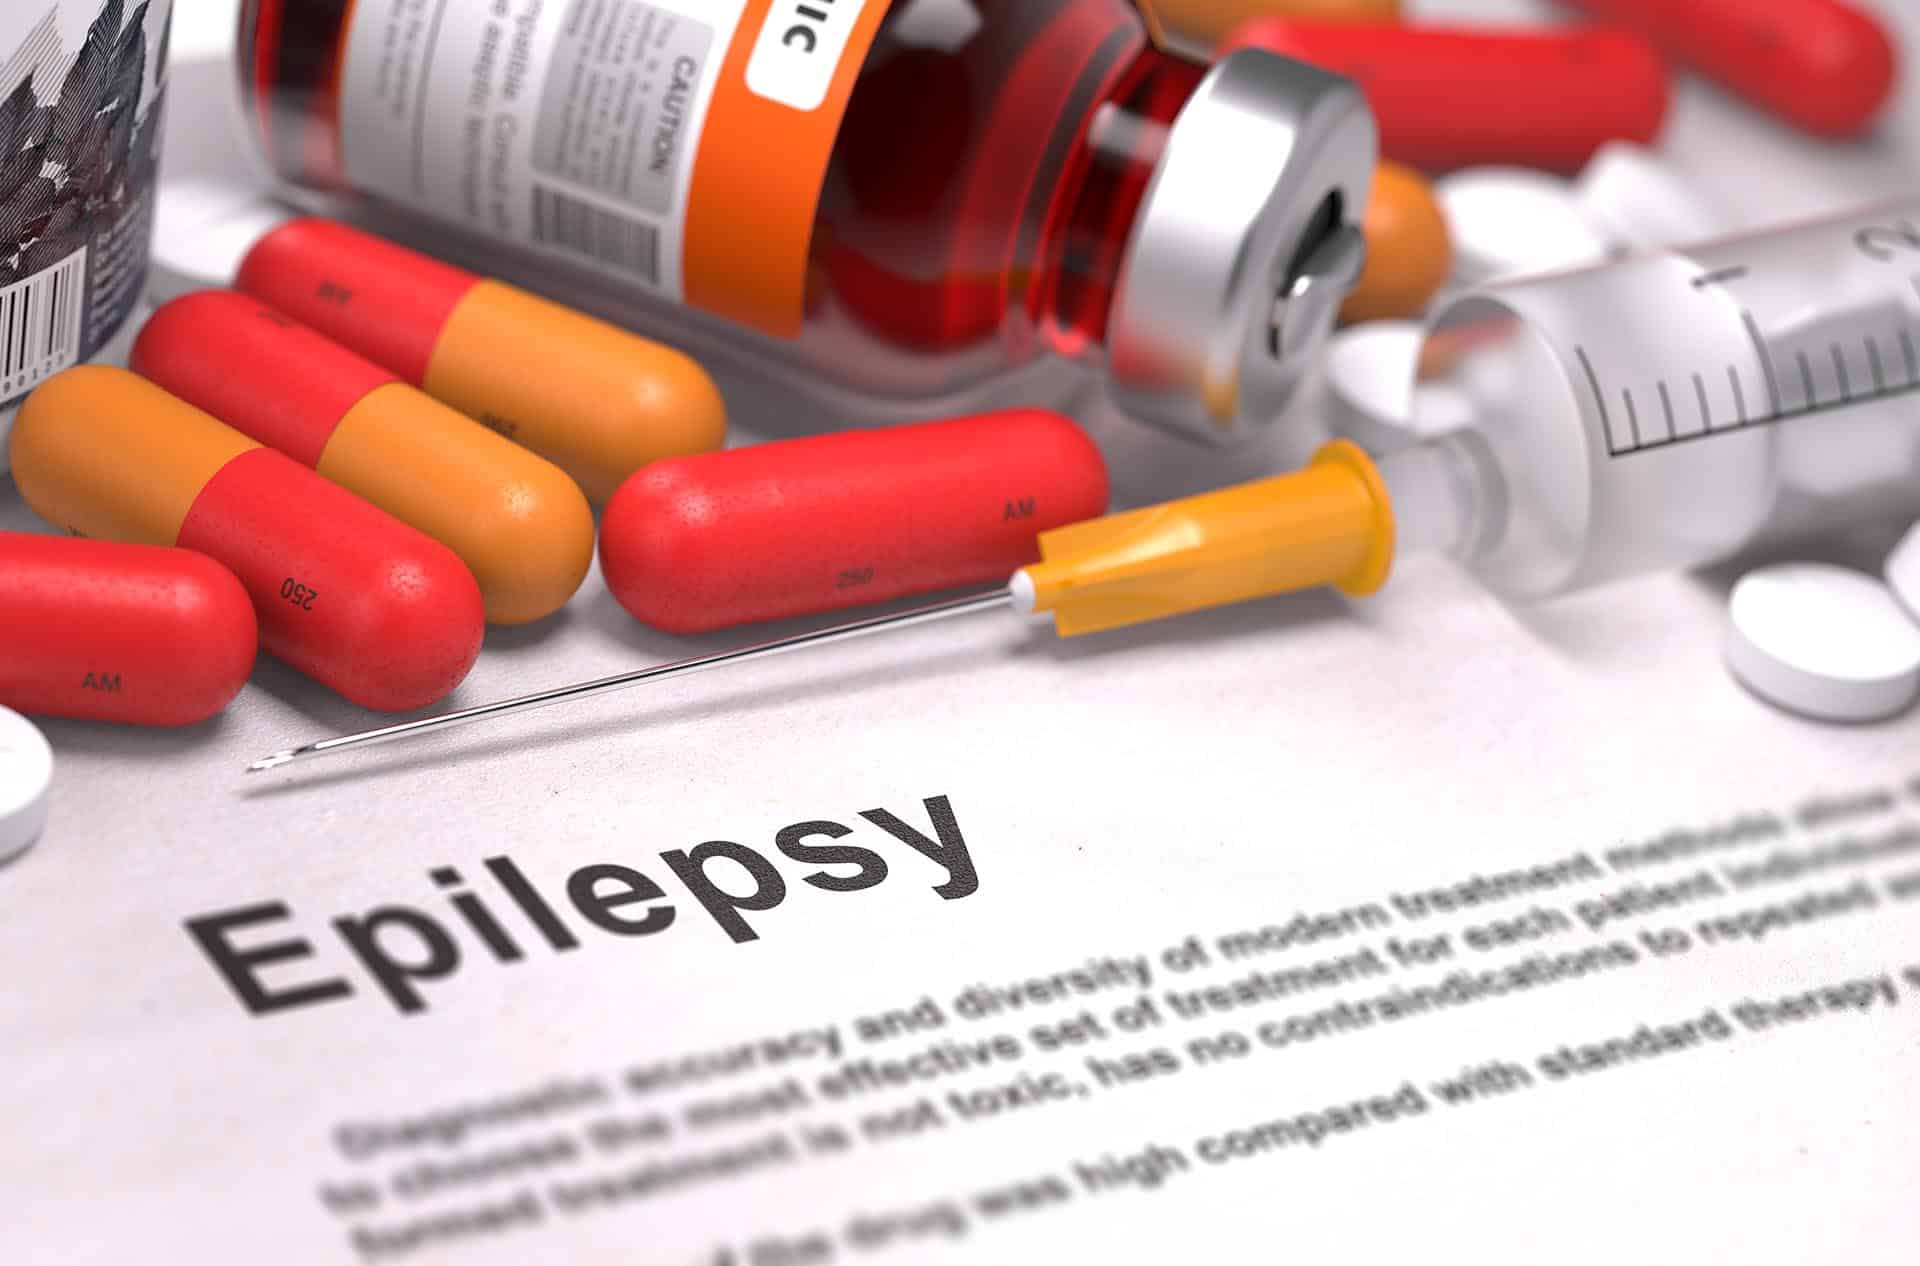 Diagnosis - Epilepsy. Medical Report with Composition of Medicaments - Red Pills, Injections and Syringe. Selective Focus.